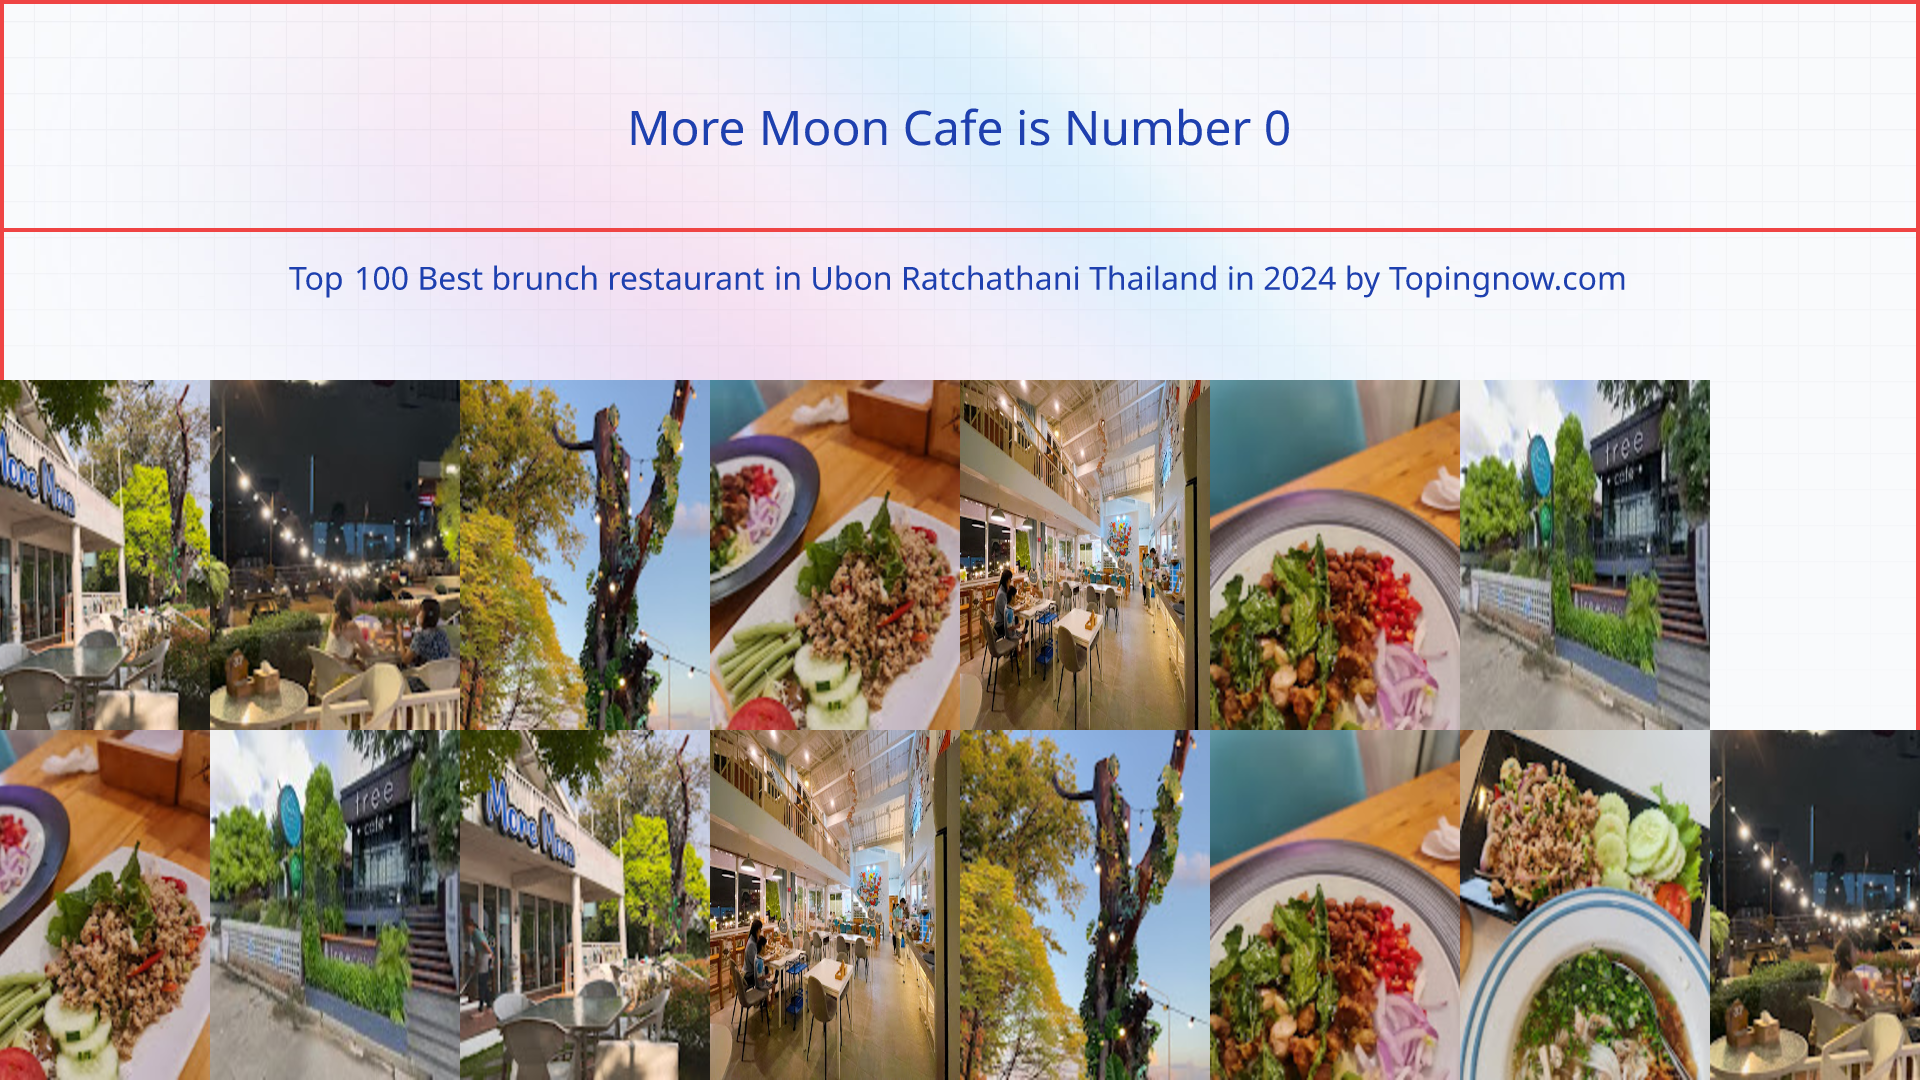 More Moon Cafe: Top 100 Best brunch restaurant in Ubon Ratchathani Thailand in 2024